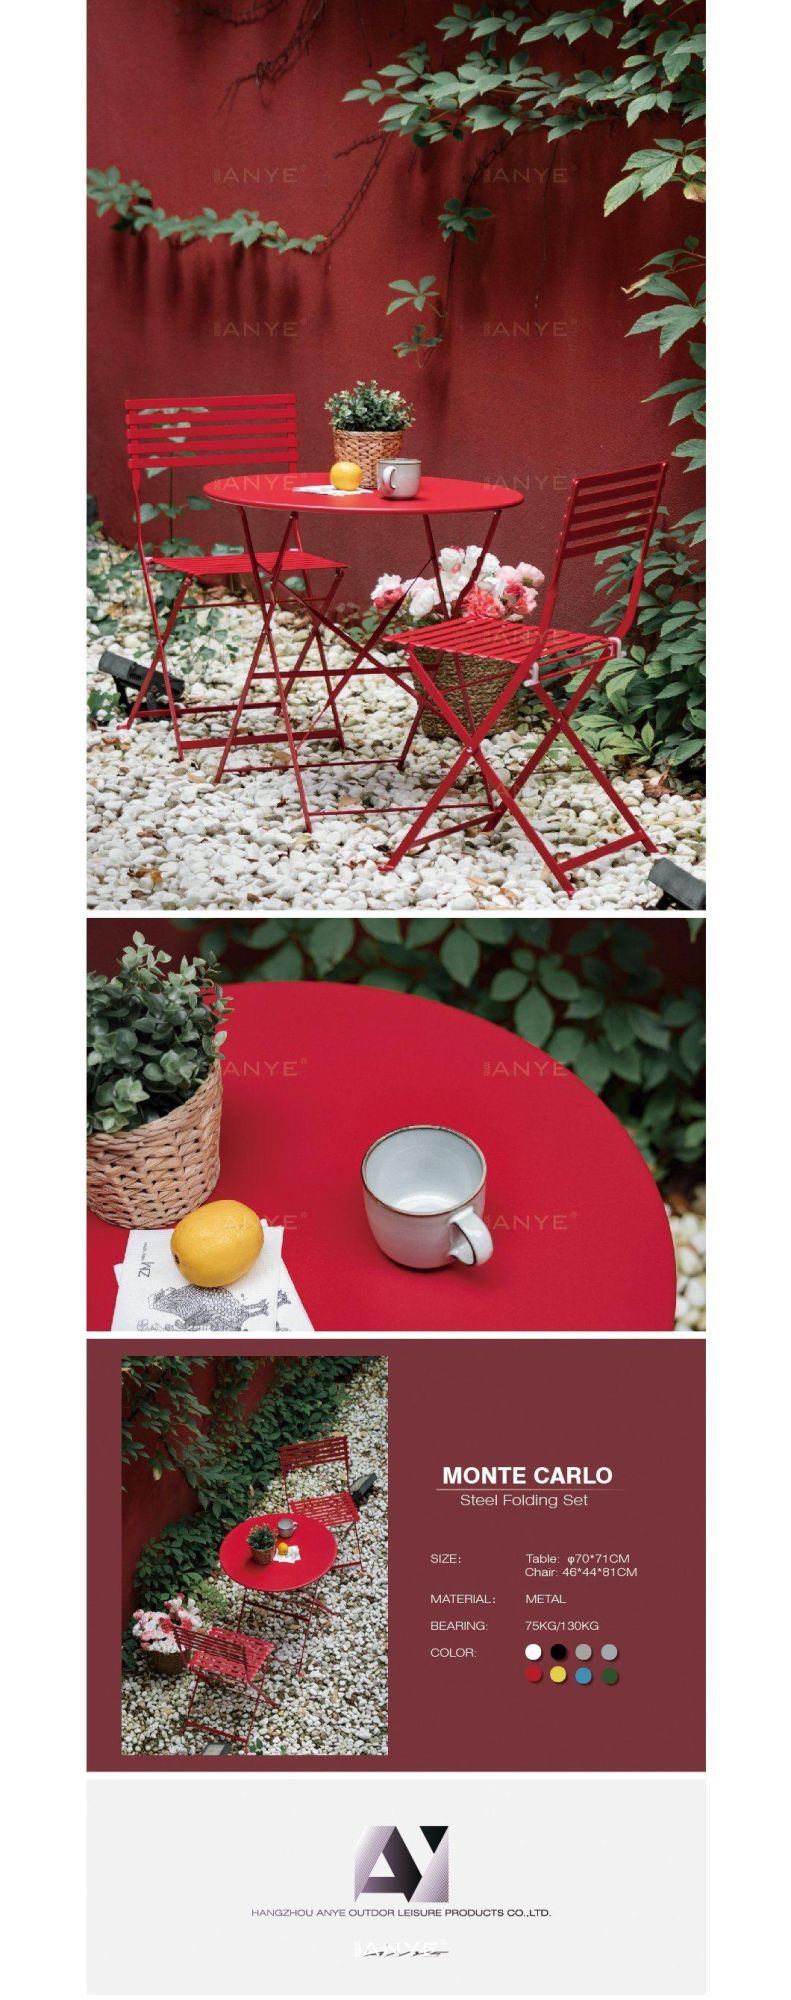 Outdoor Backyard Furniture Rust Resistant Foldable Coffee Table and Chair Space Saving Dining Furniture Set